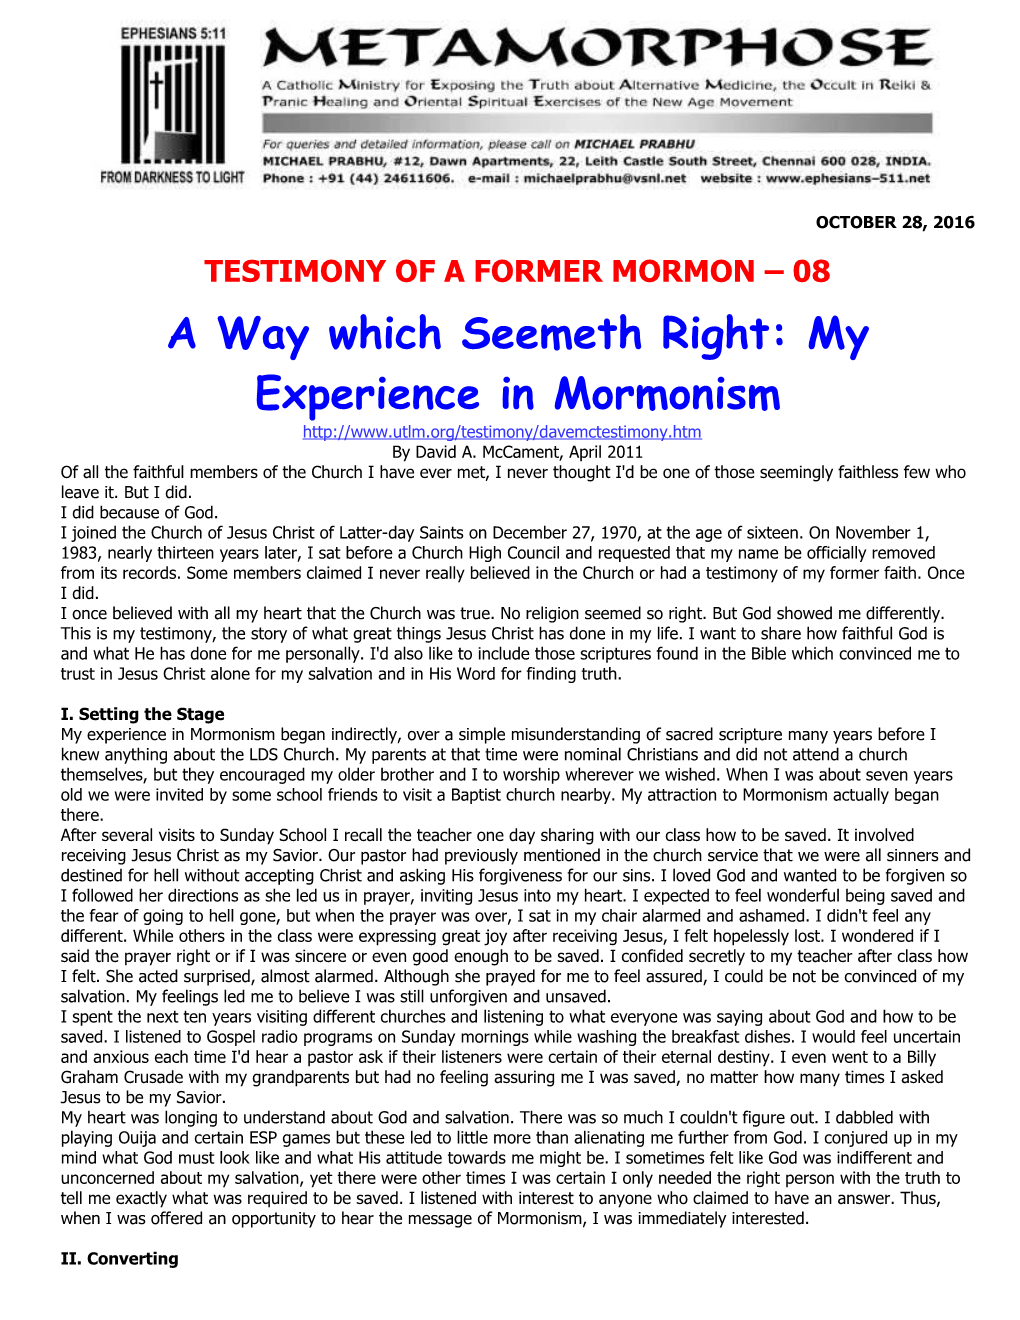 A Way Which Seemeth Right: My Experience in Mormonism